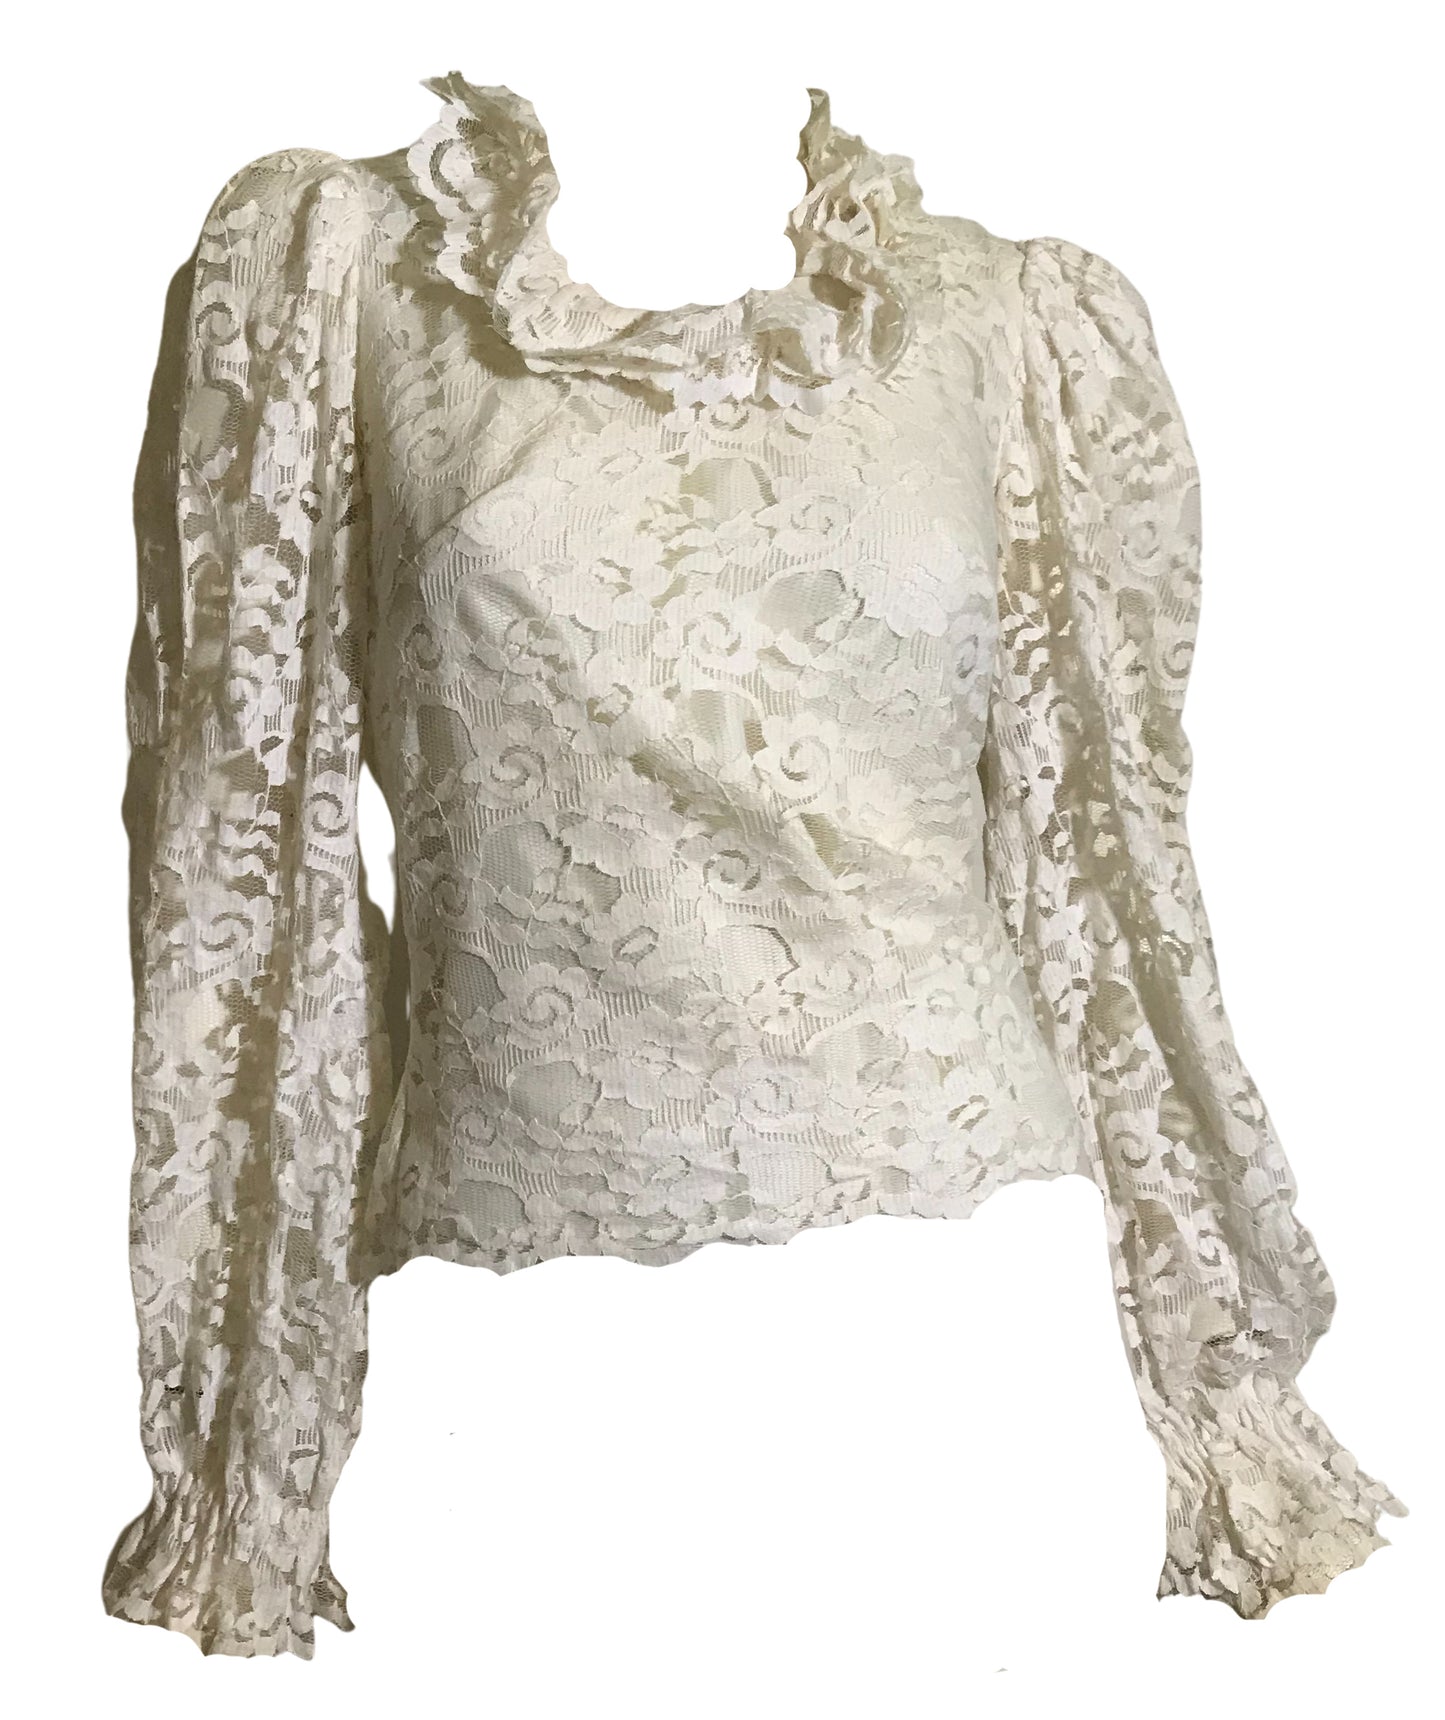 Frilly White Lace Long Sleeved Blouse circa 1960s